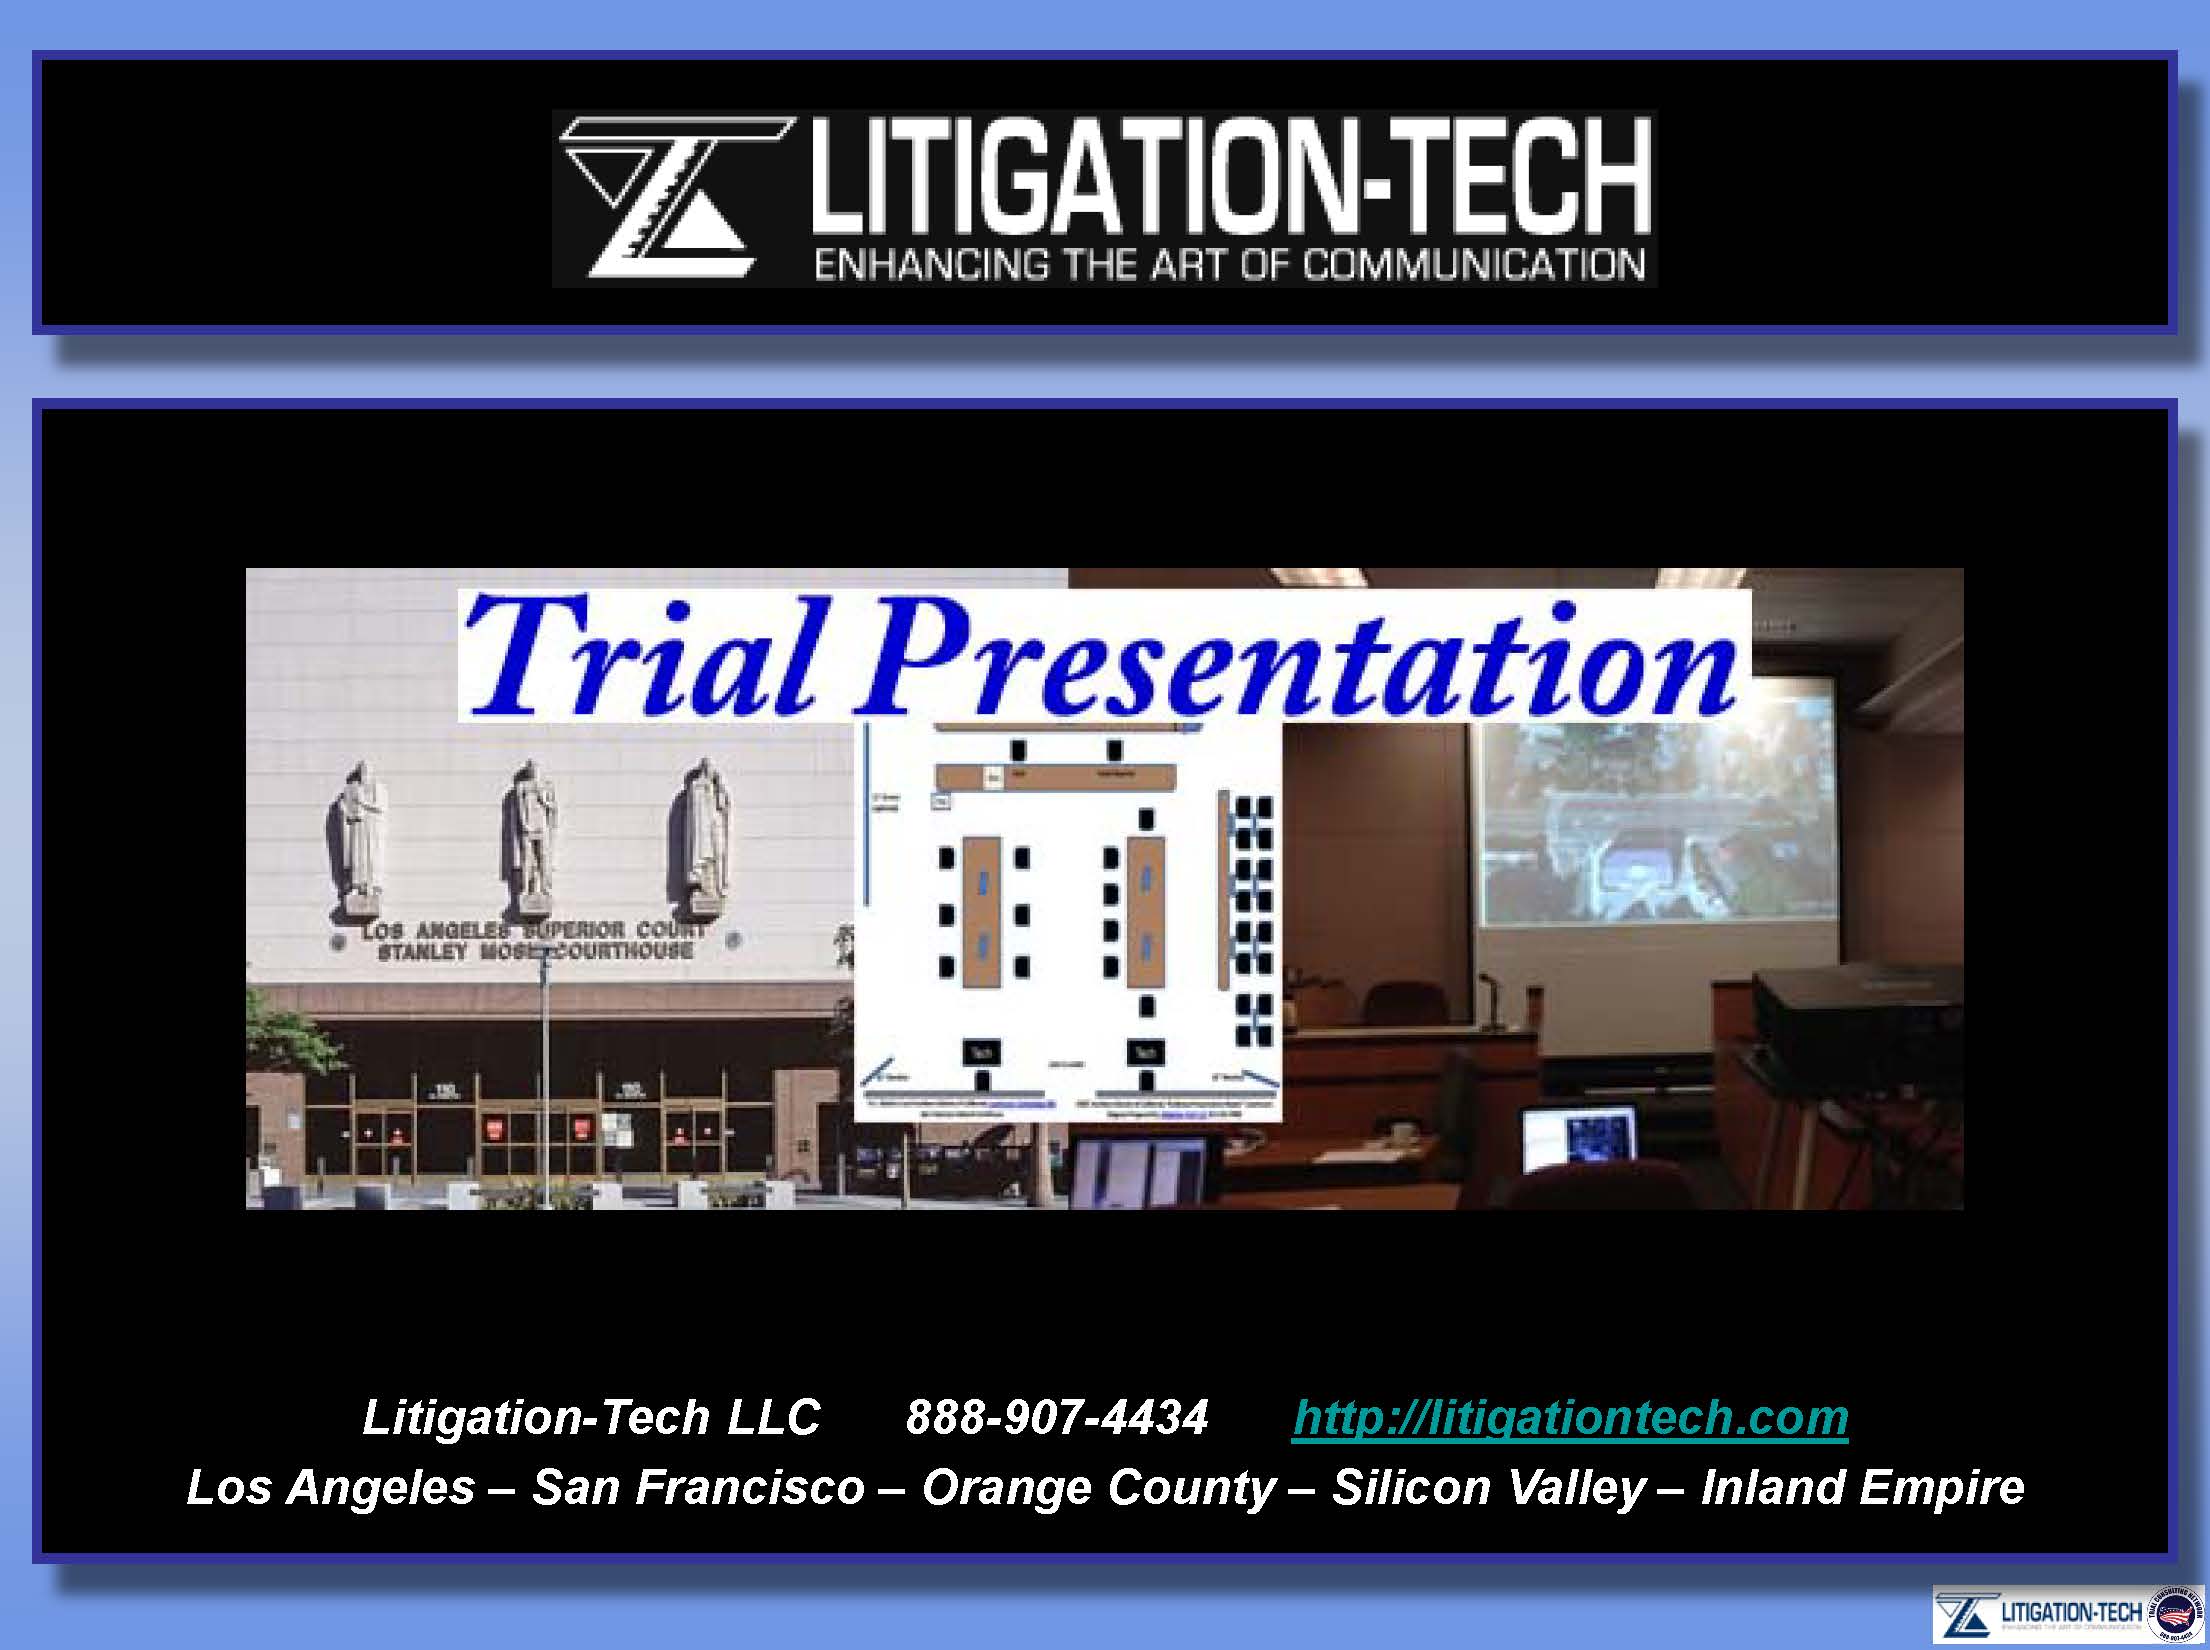 Click here to view our complete trial presentation slide deck